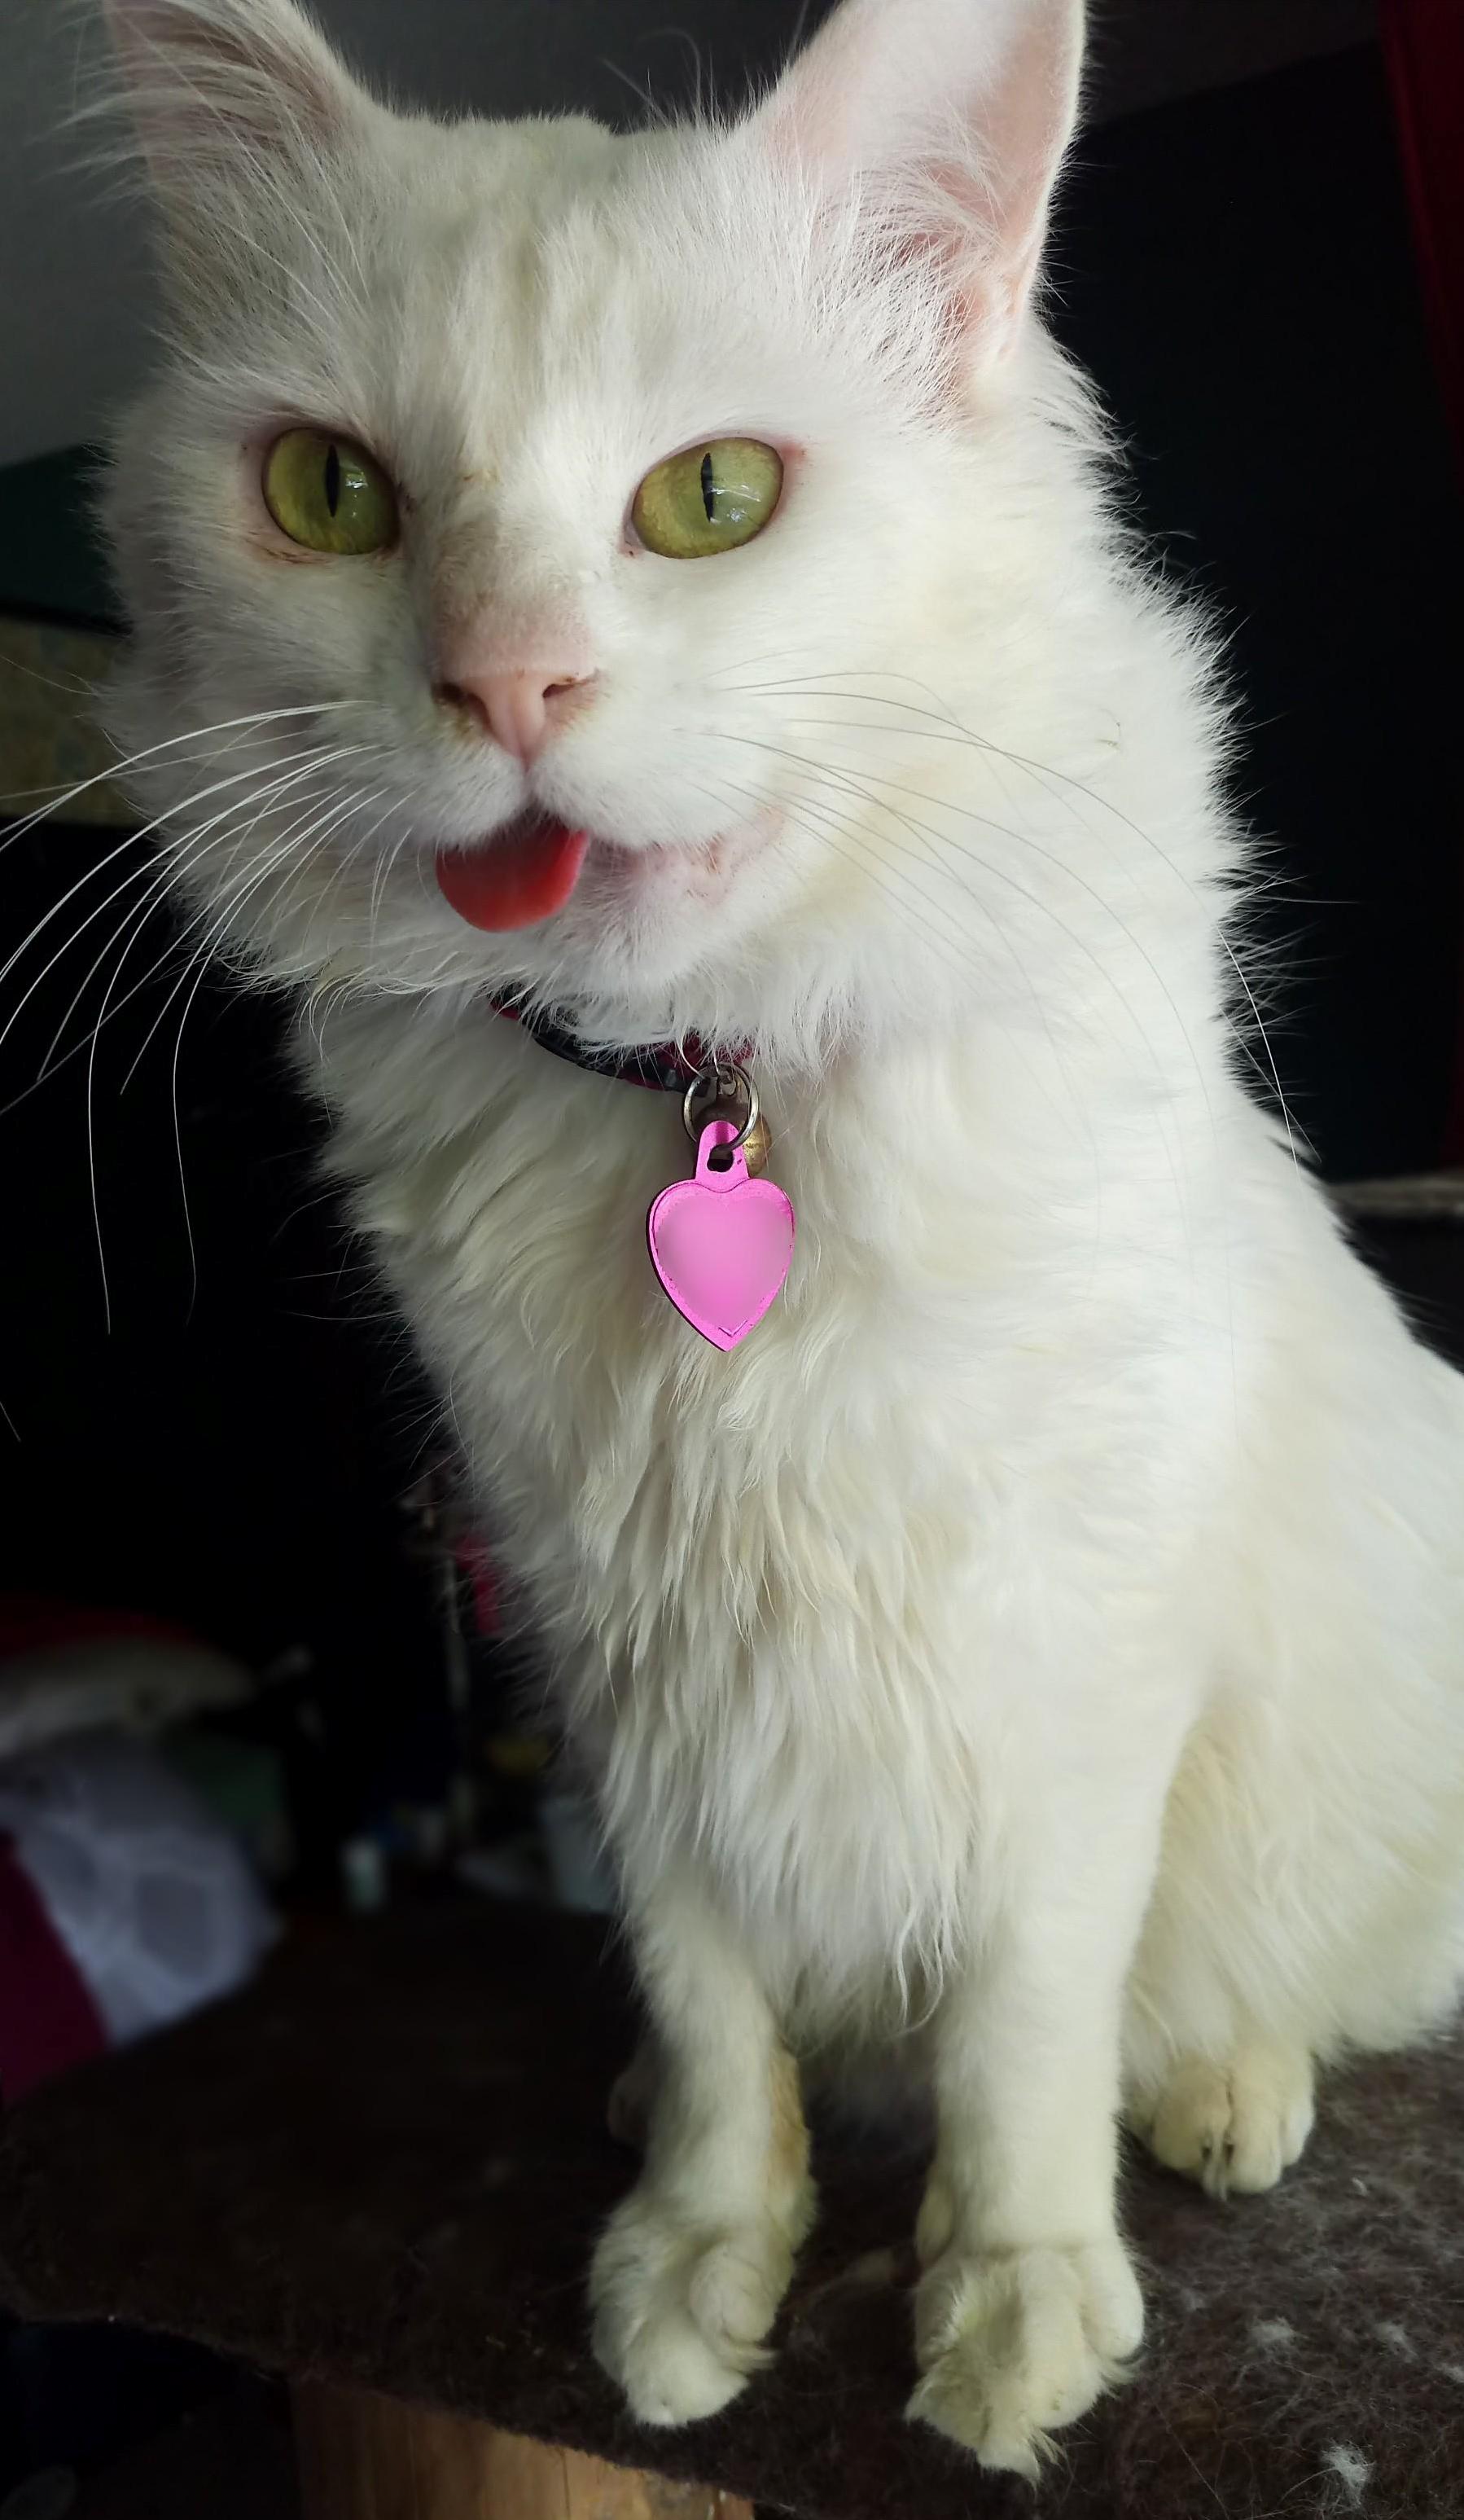 He was kicked in the face and now has perma blep